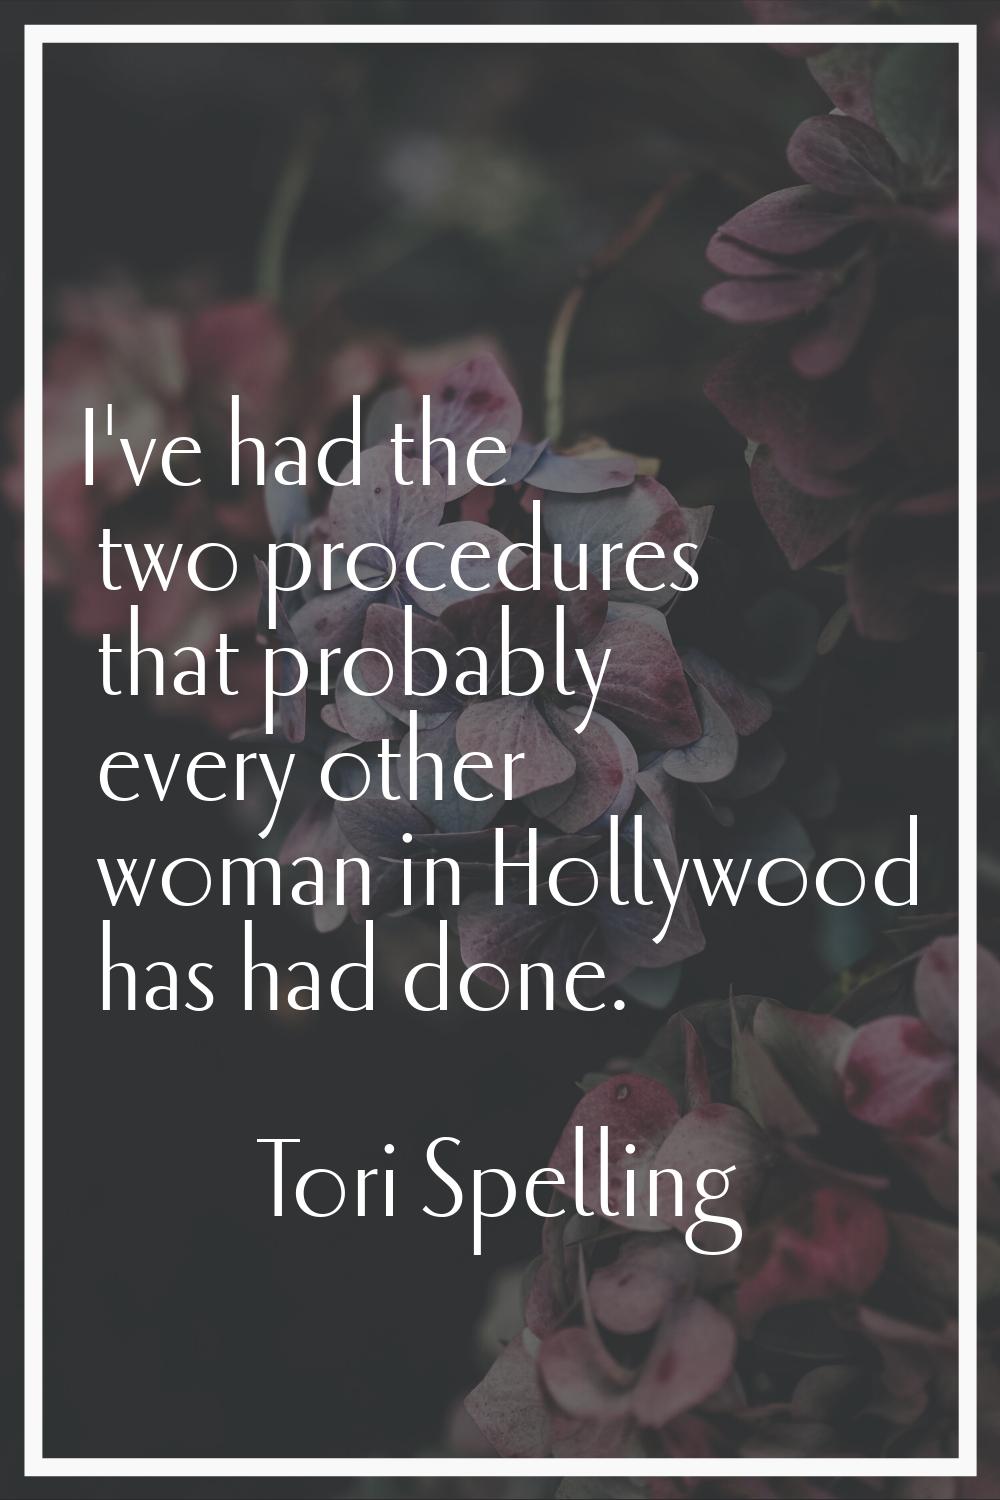 I've had the two procedures that probably every other woman in Hollywood has had done.